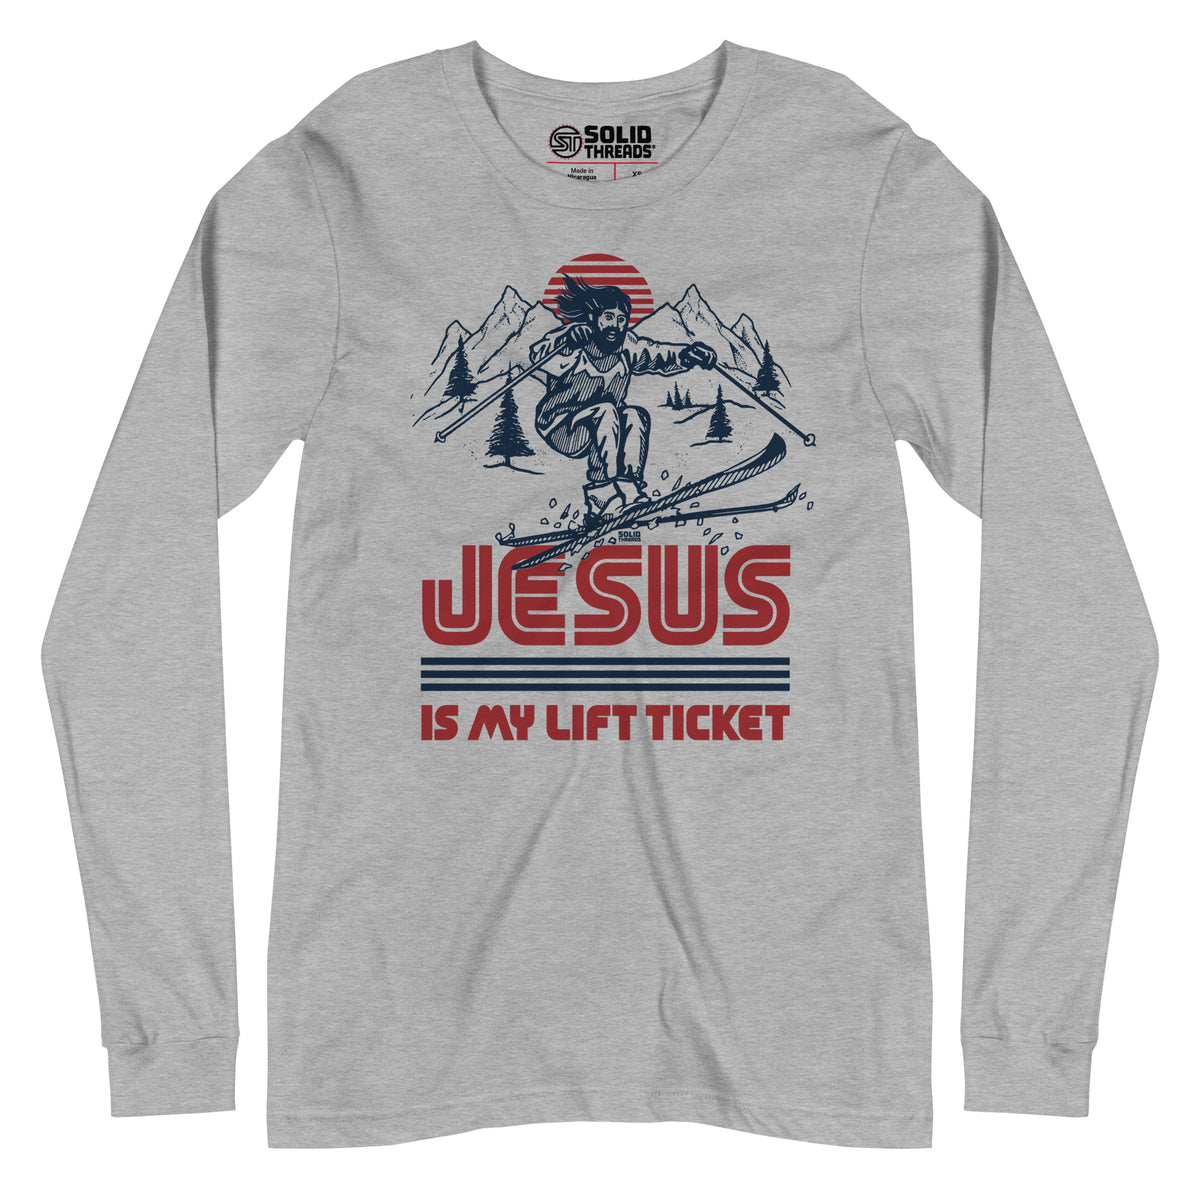 Jesus Is My Lift Ticket Vintage Graphic Long Sleeve Tee | Funny Skiing T-Shirt - Solid Threads